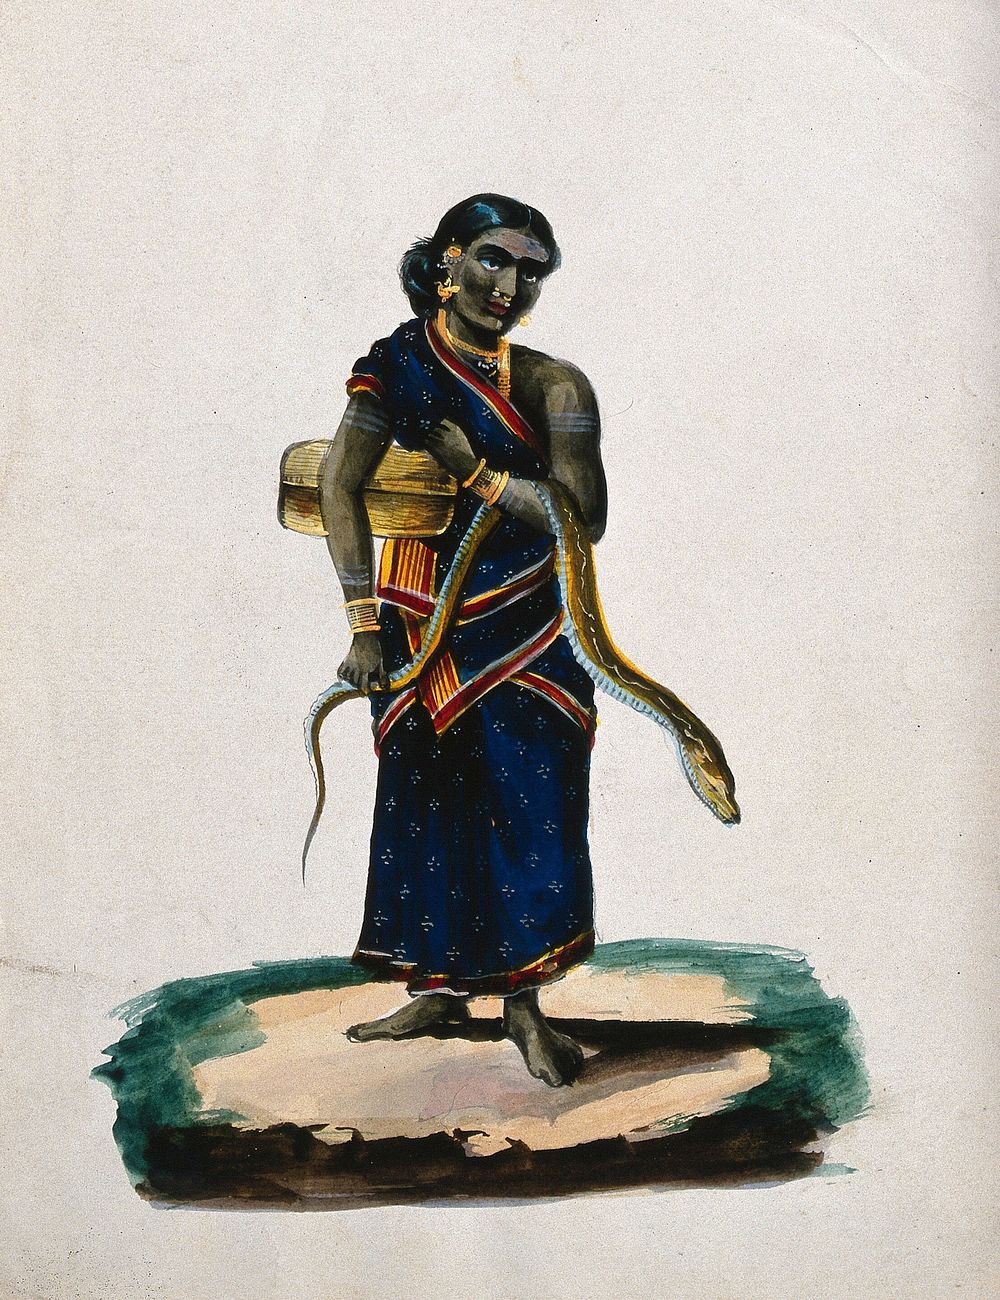 An Indian woman holding a snake and a basket. Gouache painting by an Indian painter.